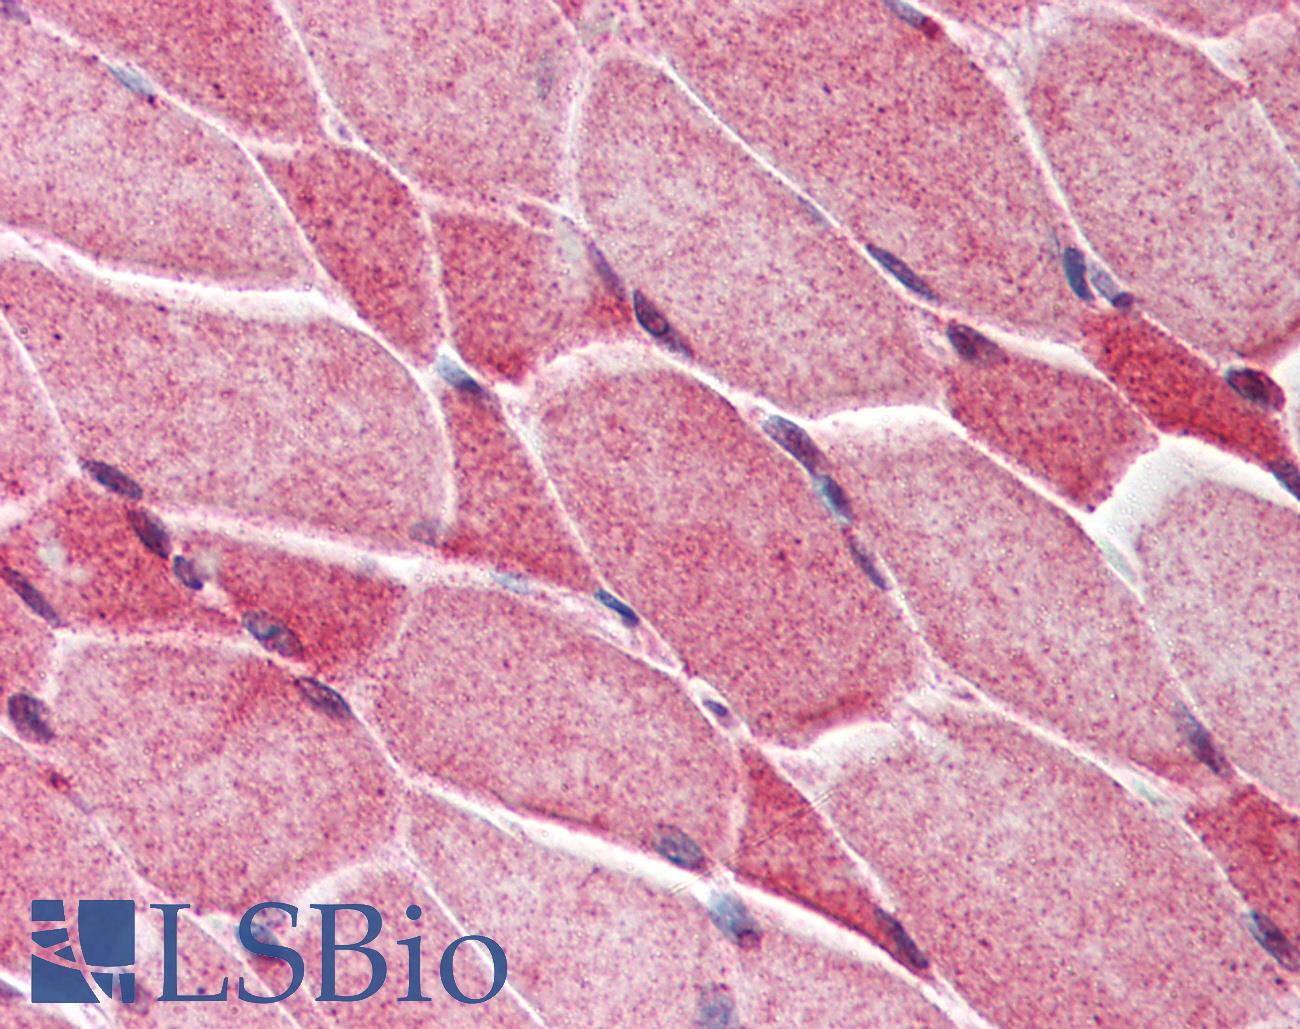 AES / Groucho Antibody - Anti-AES antibody IHC of human skeletal muscle. Immunohistochemistry of formalin-fixed, paraffin-embedded tissue after heat-induced antigen retrieval. Antibody concentration 5 ug/ml.